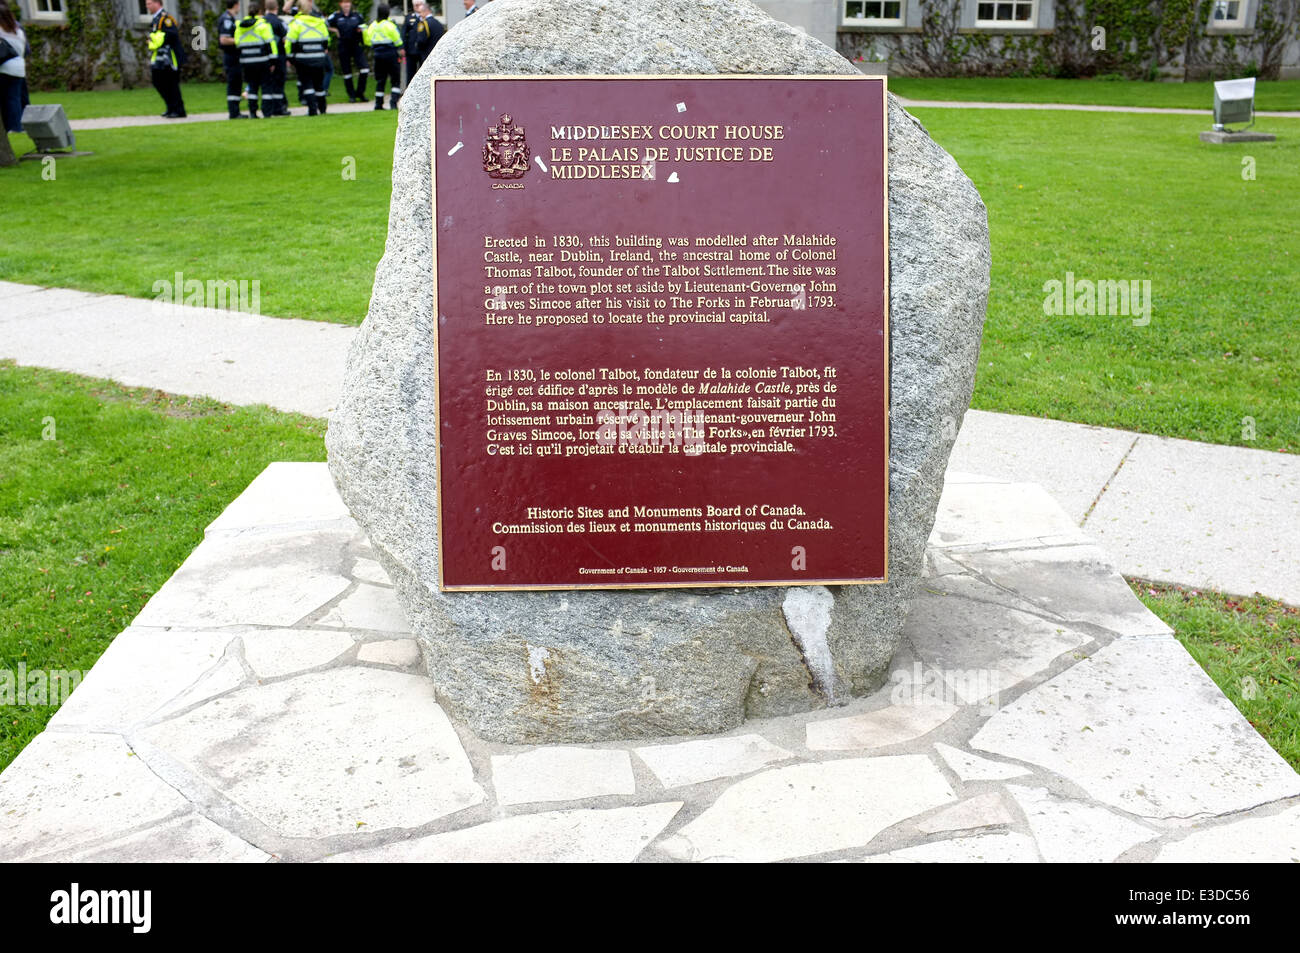 The plaque outside the Middlesex Court House in London, Ontario which is a National Historic Site of Canada. Stock Photo